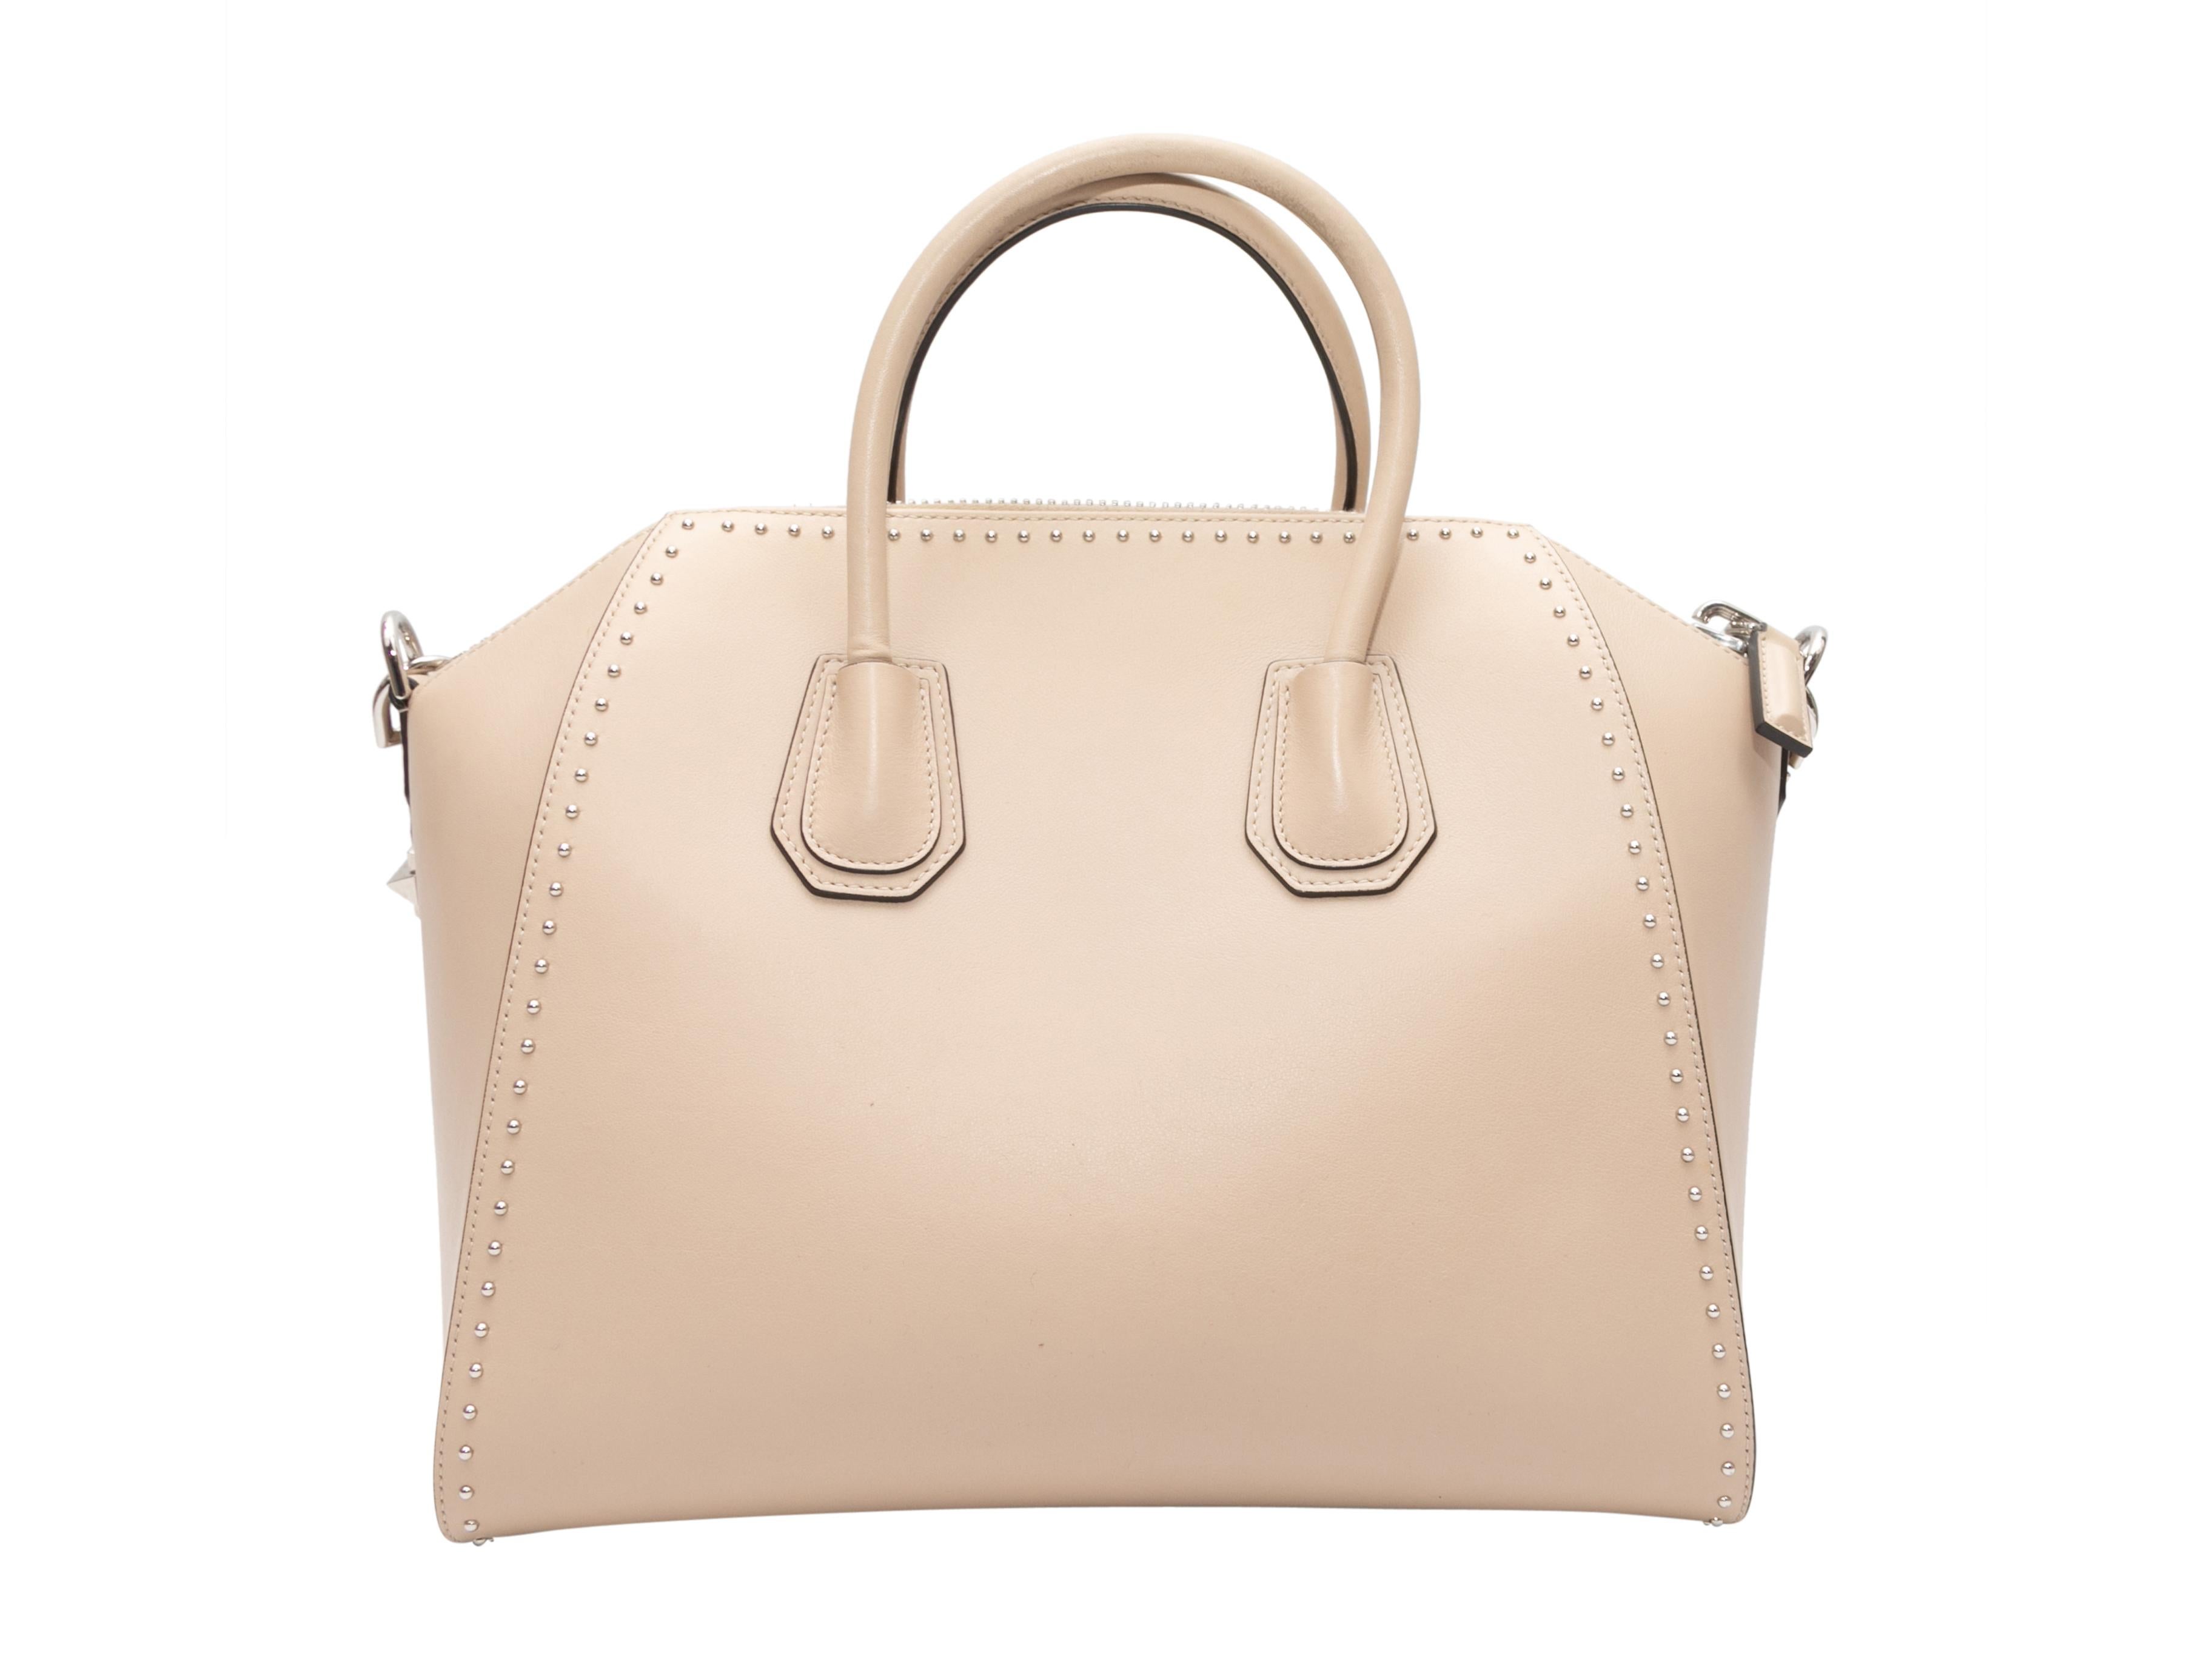 Beige Givenchy Large Antigona Handbag In Good Condition For Sale In New York, NY